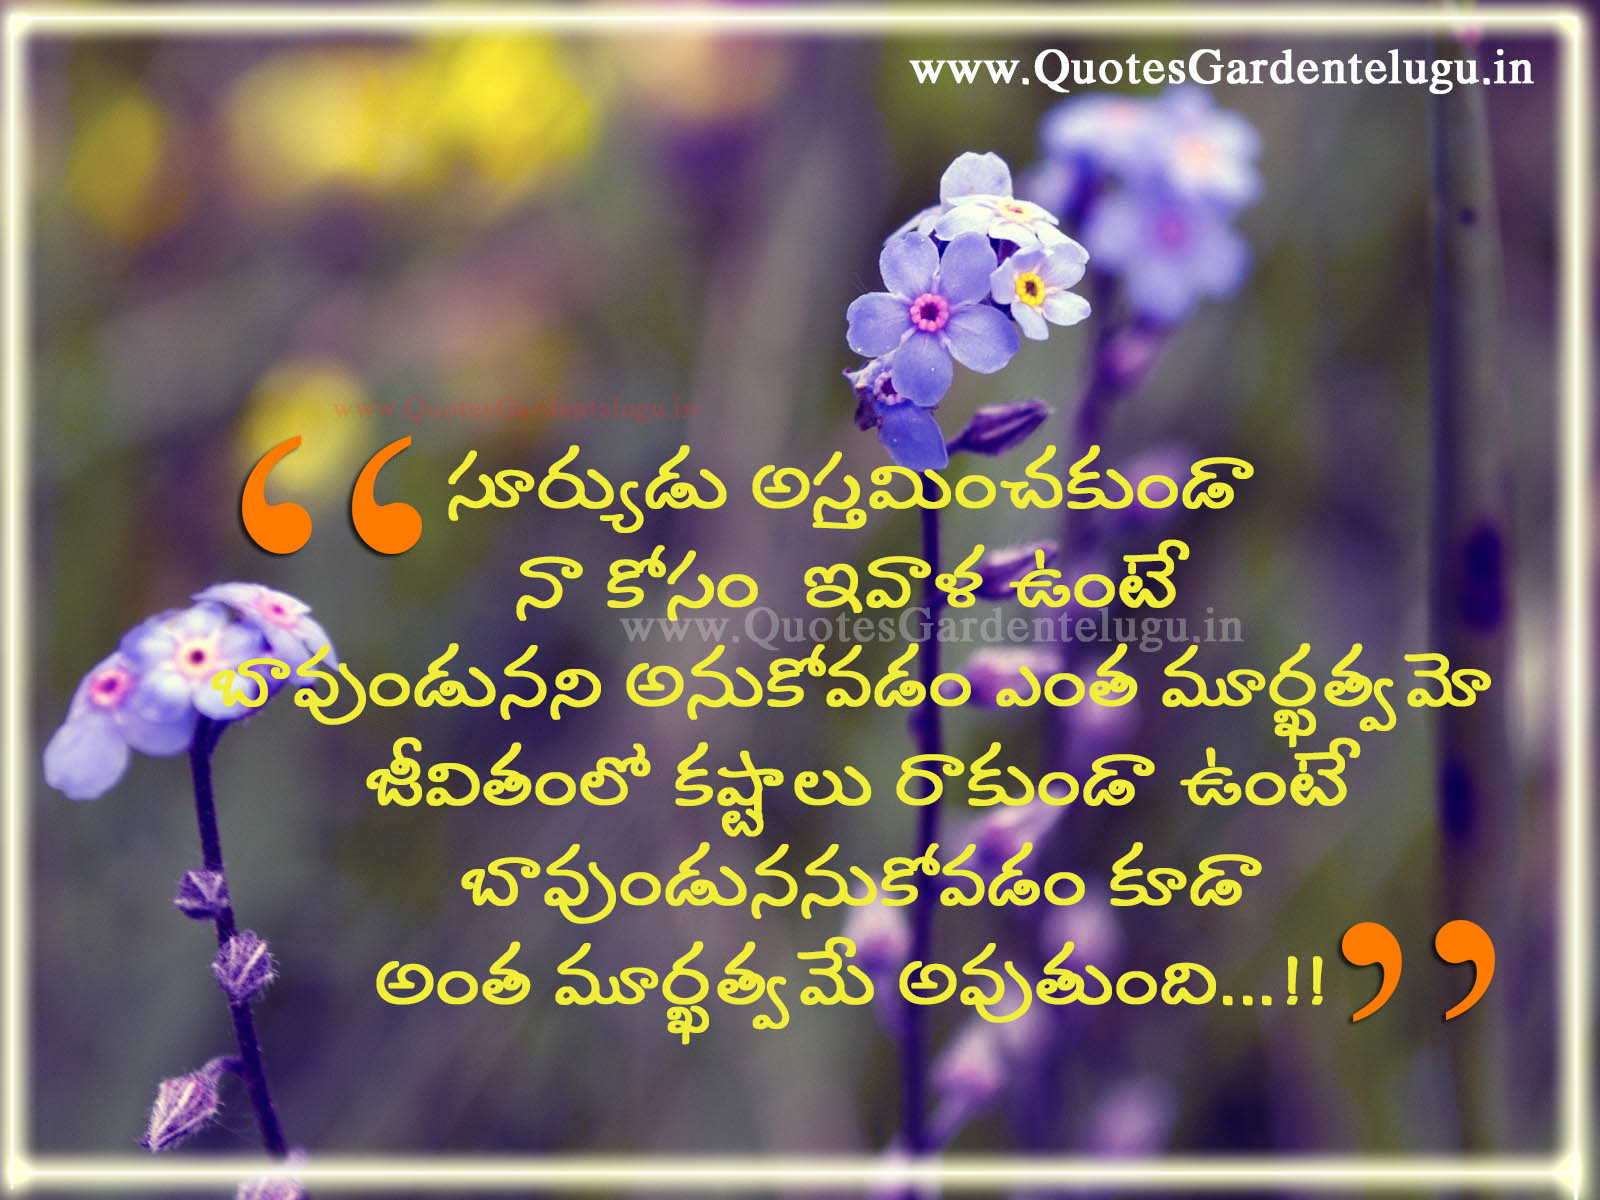 Shubharatri kavitalu messages in telugu wishes  QUOTES 